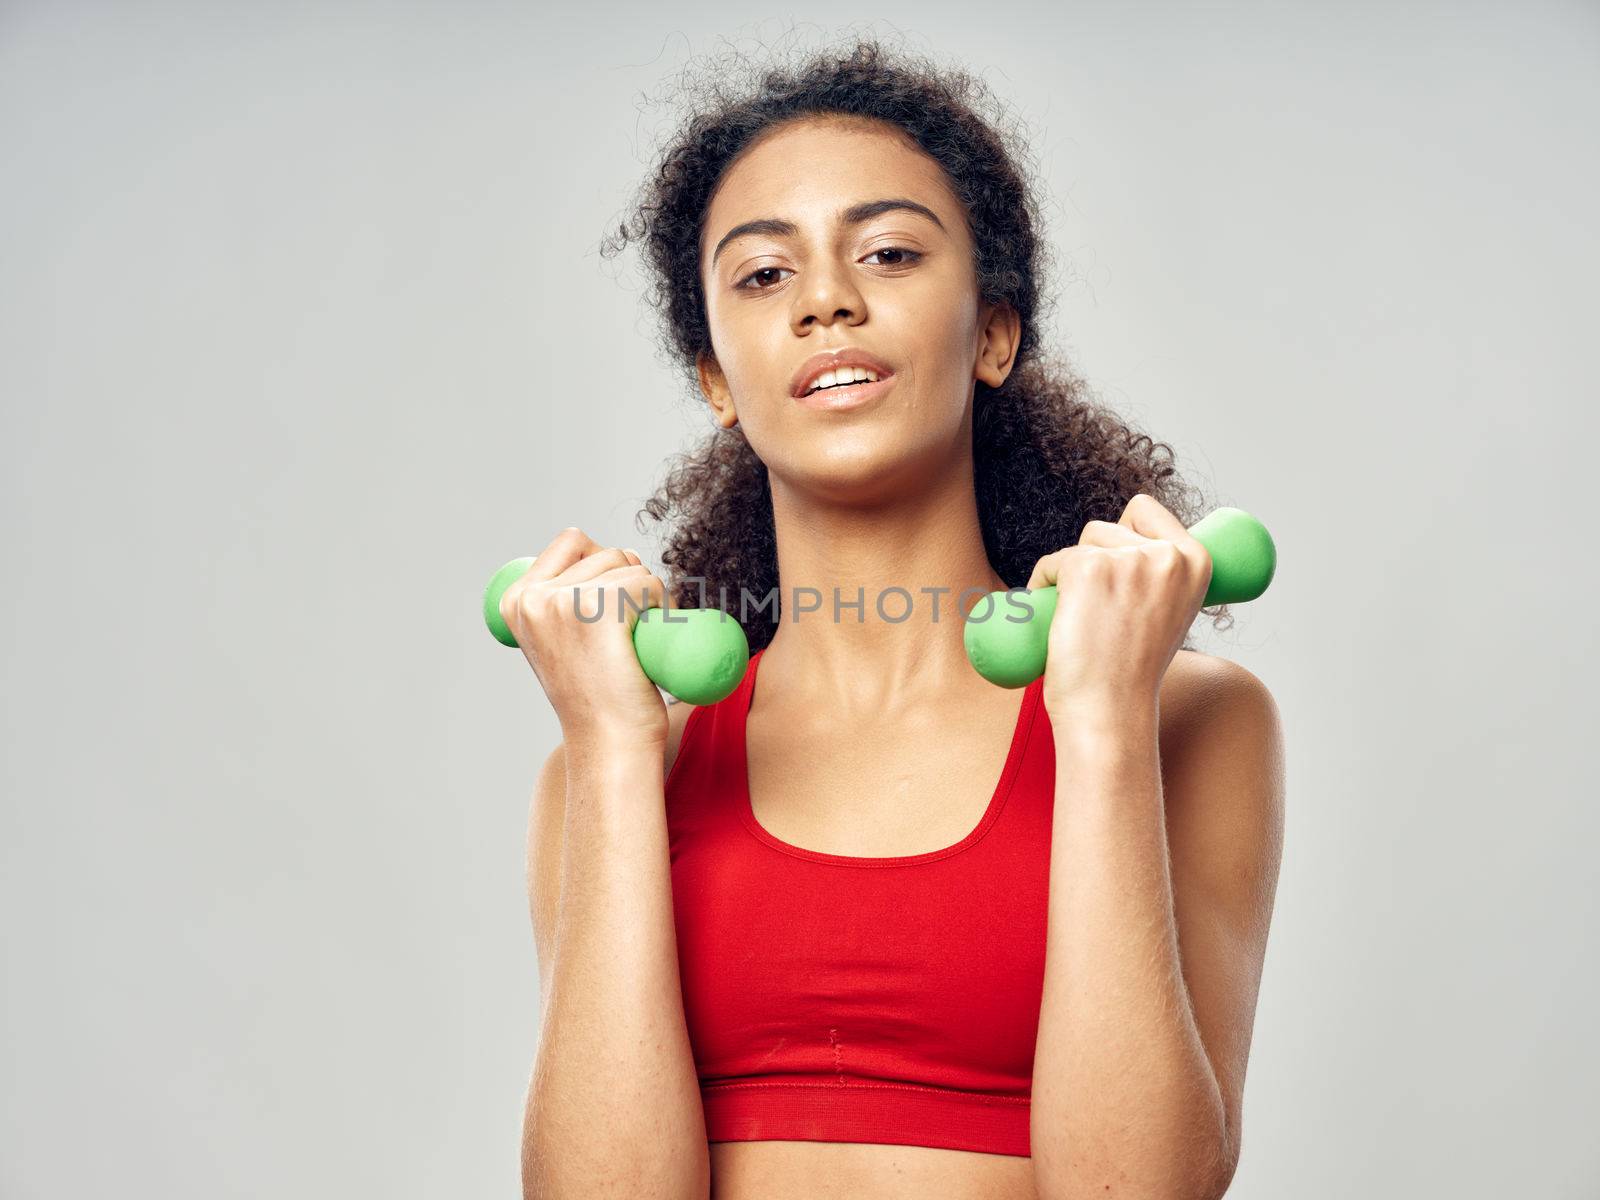 green dumbbells in the hands of a slender woman who plays sports